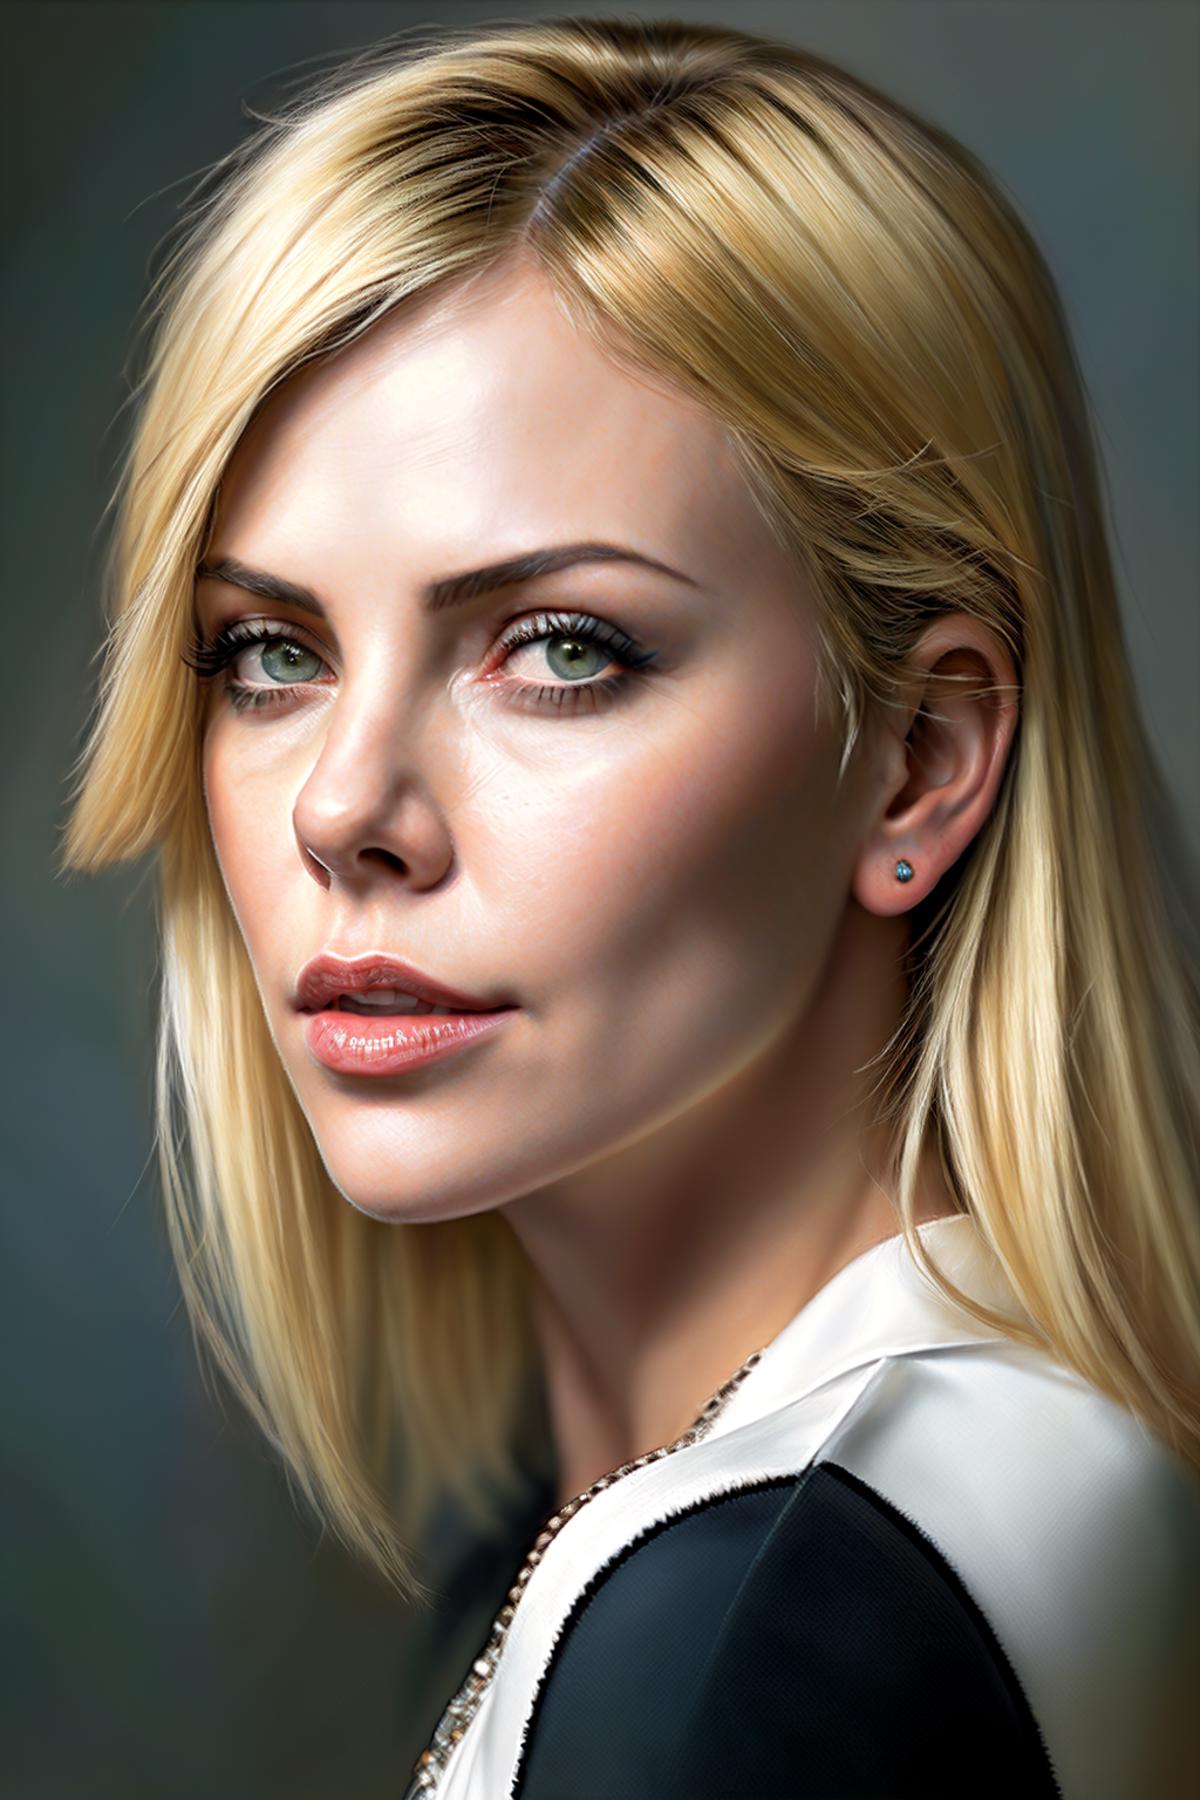 Charlize Theron image by frankyfrank2k